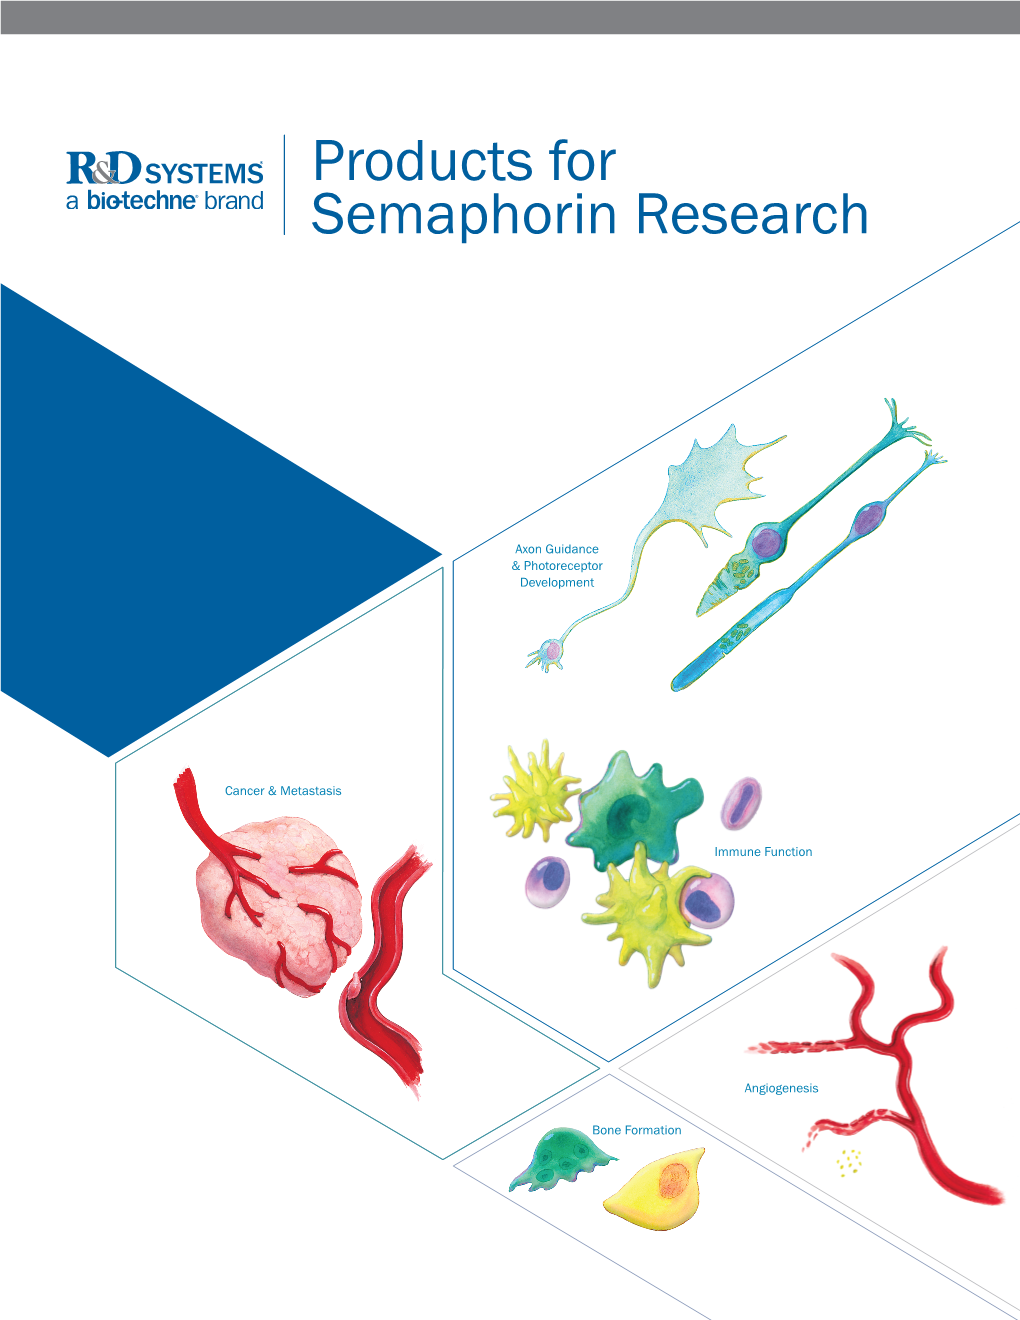 Products for Semaphorin Research